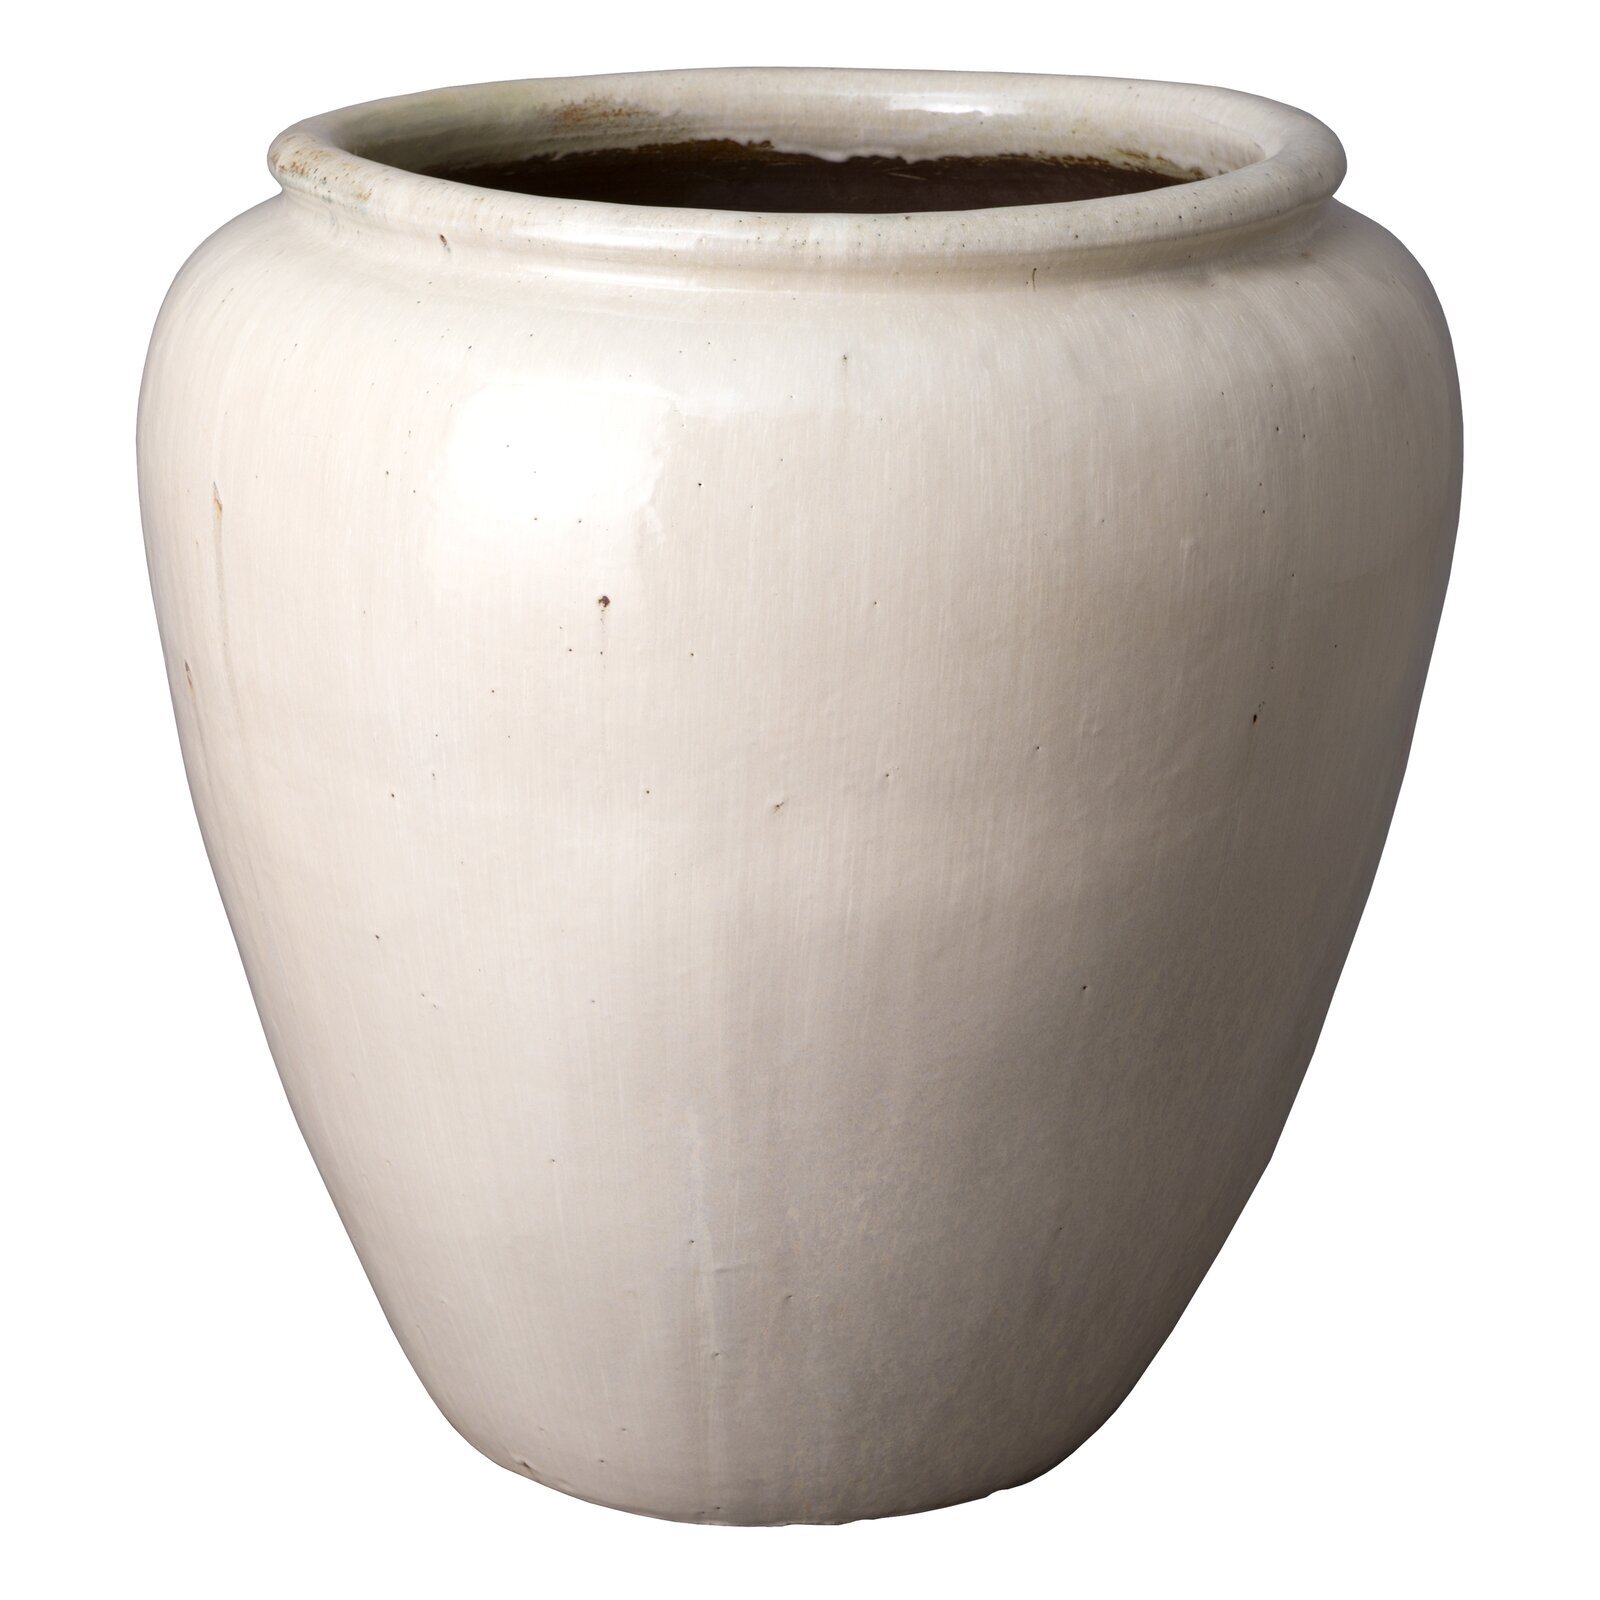 Smooth and White polished Extra large Ceramic Planters for Outside